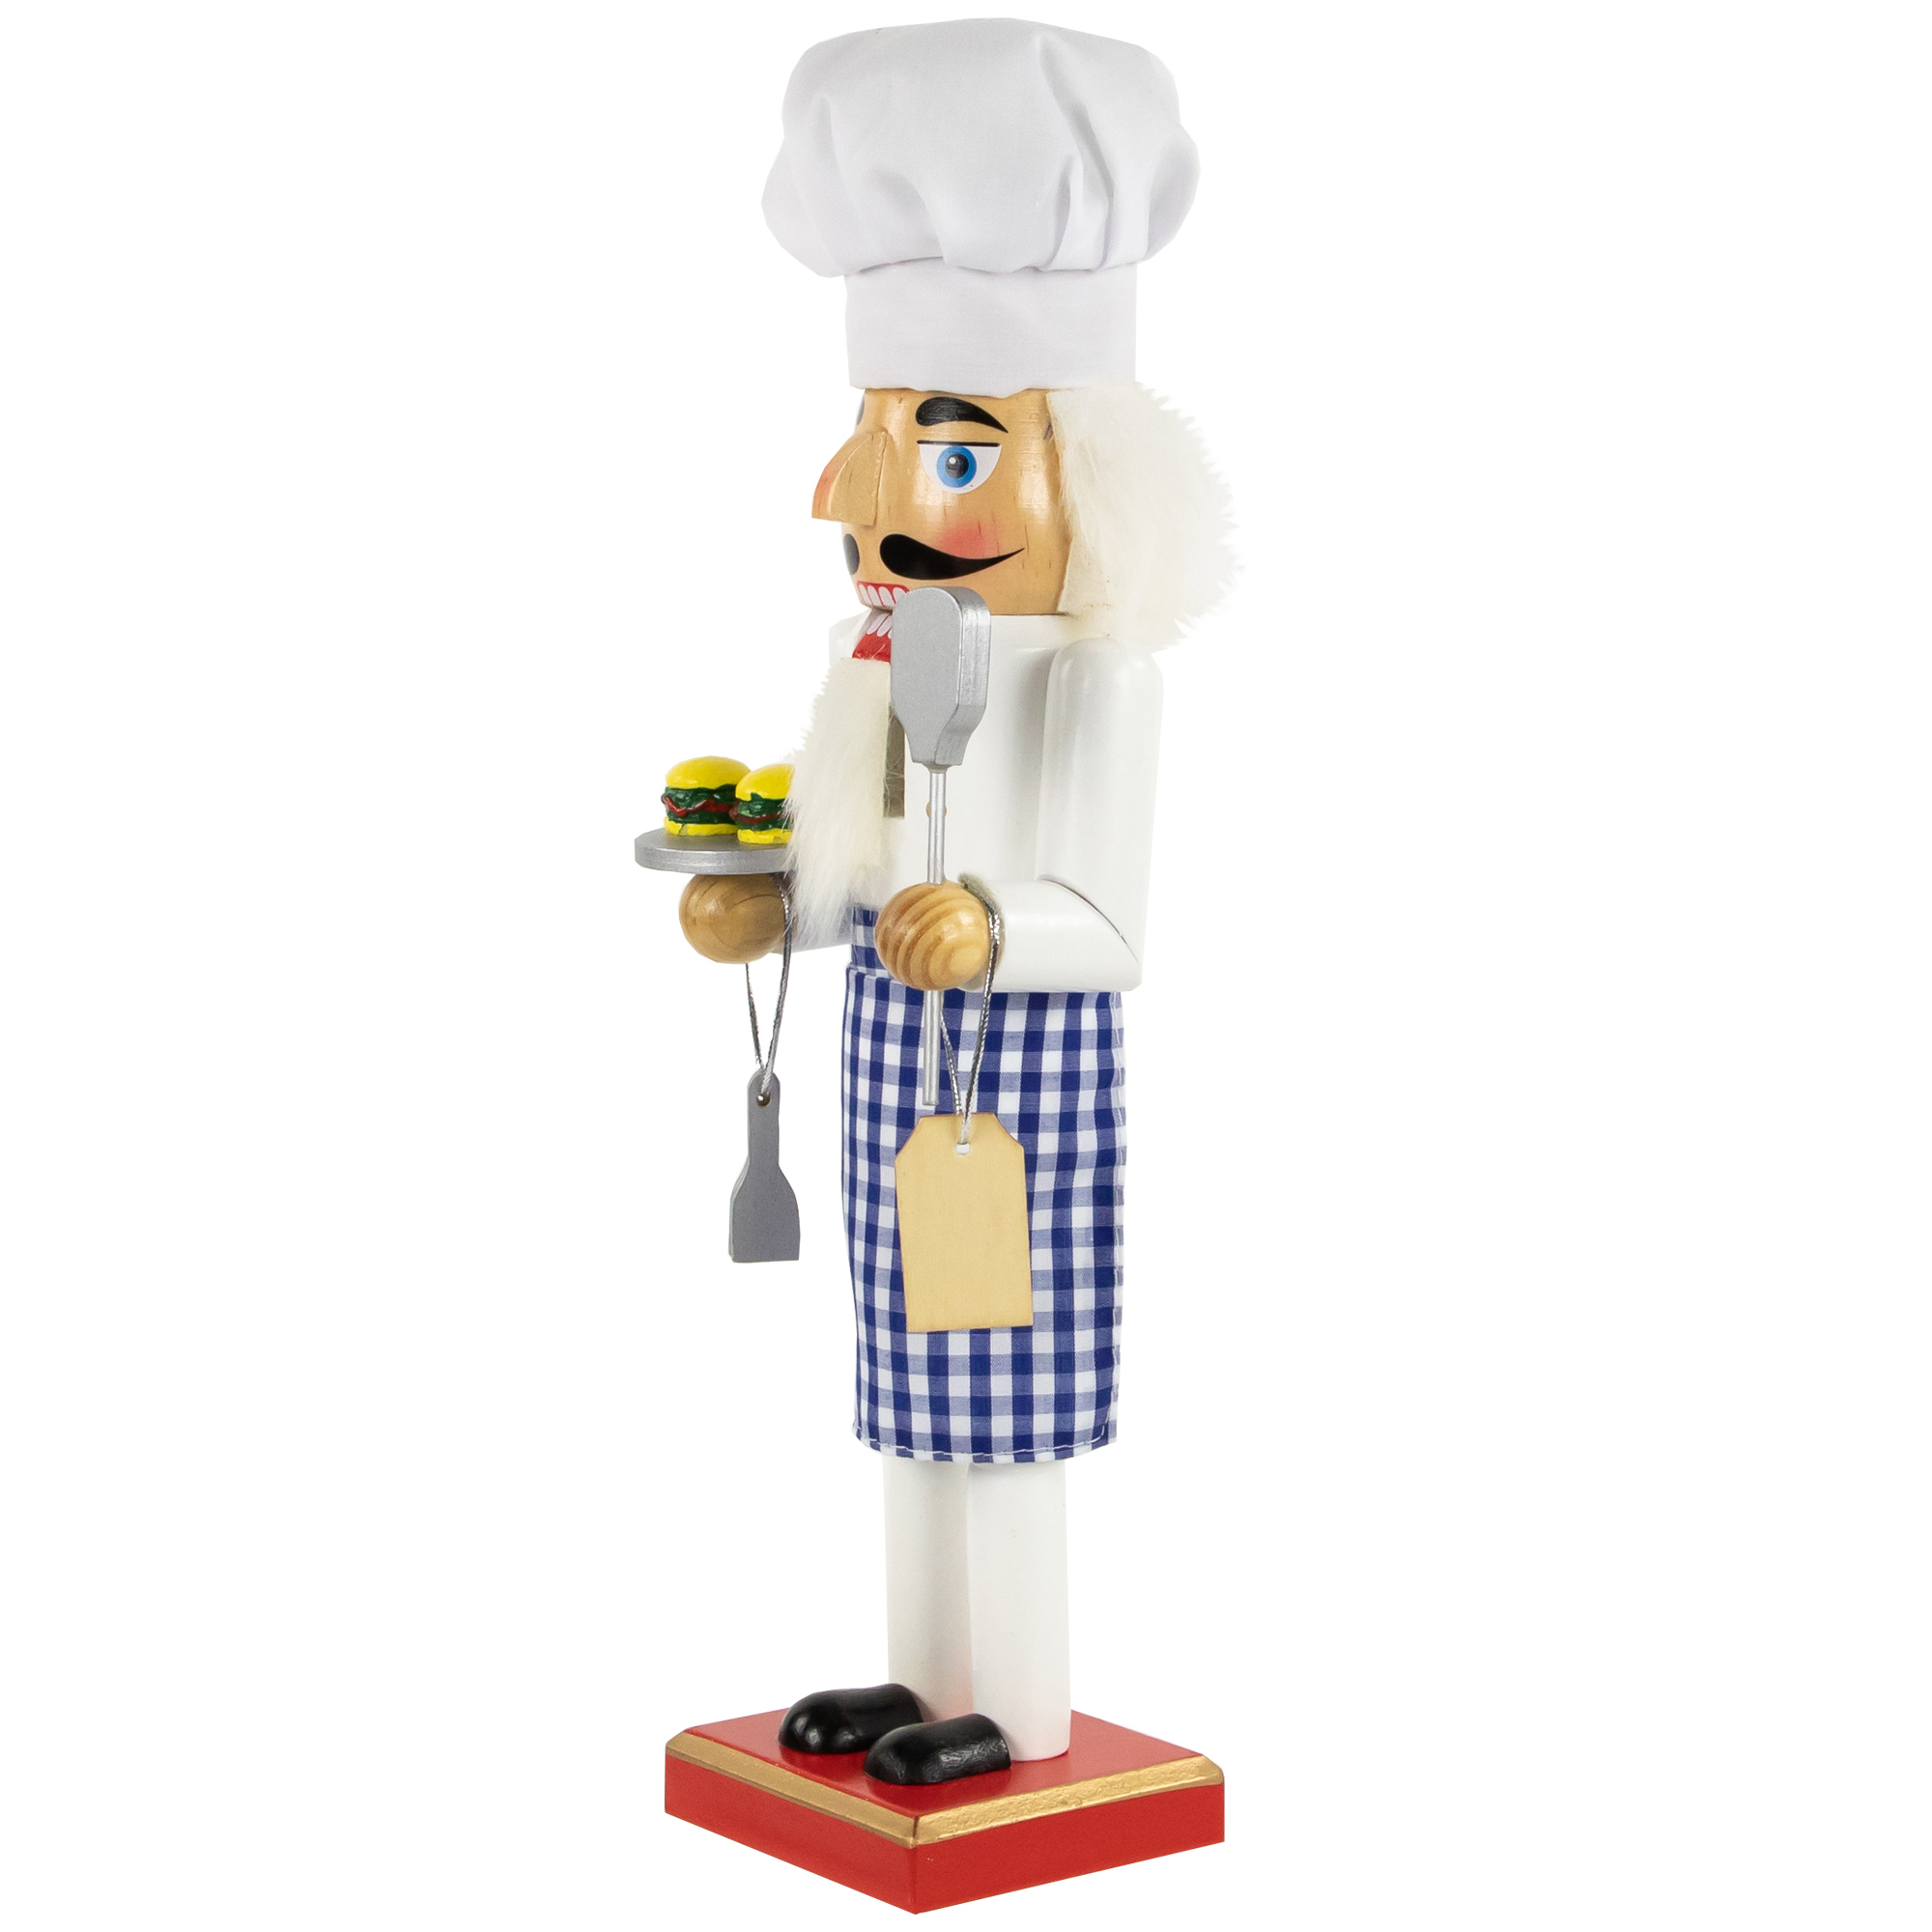 Nutcracker Factory 14" White and Blue Chef with Gingham Apron Wooden Christmas Nutcracker